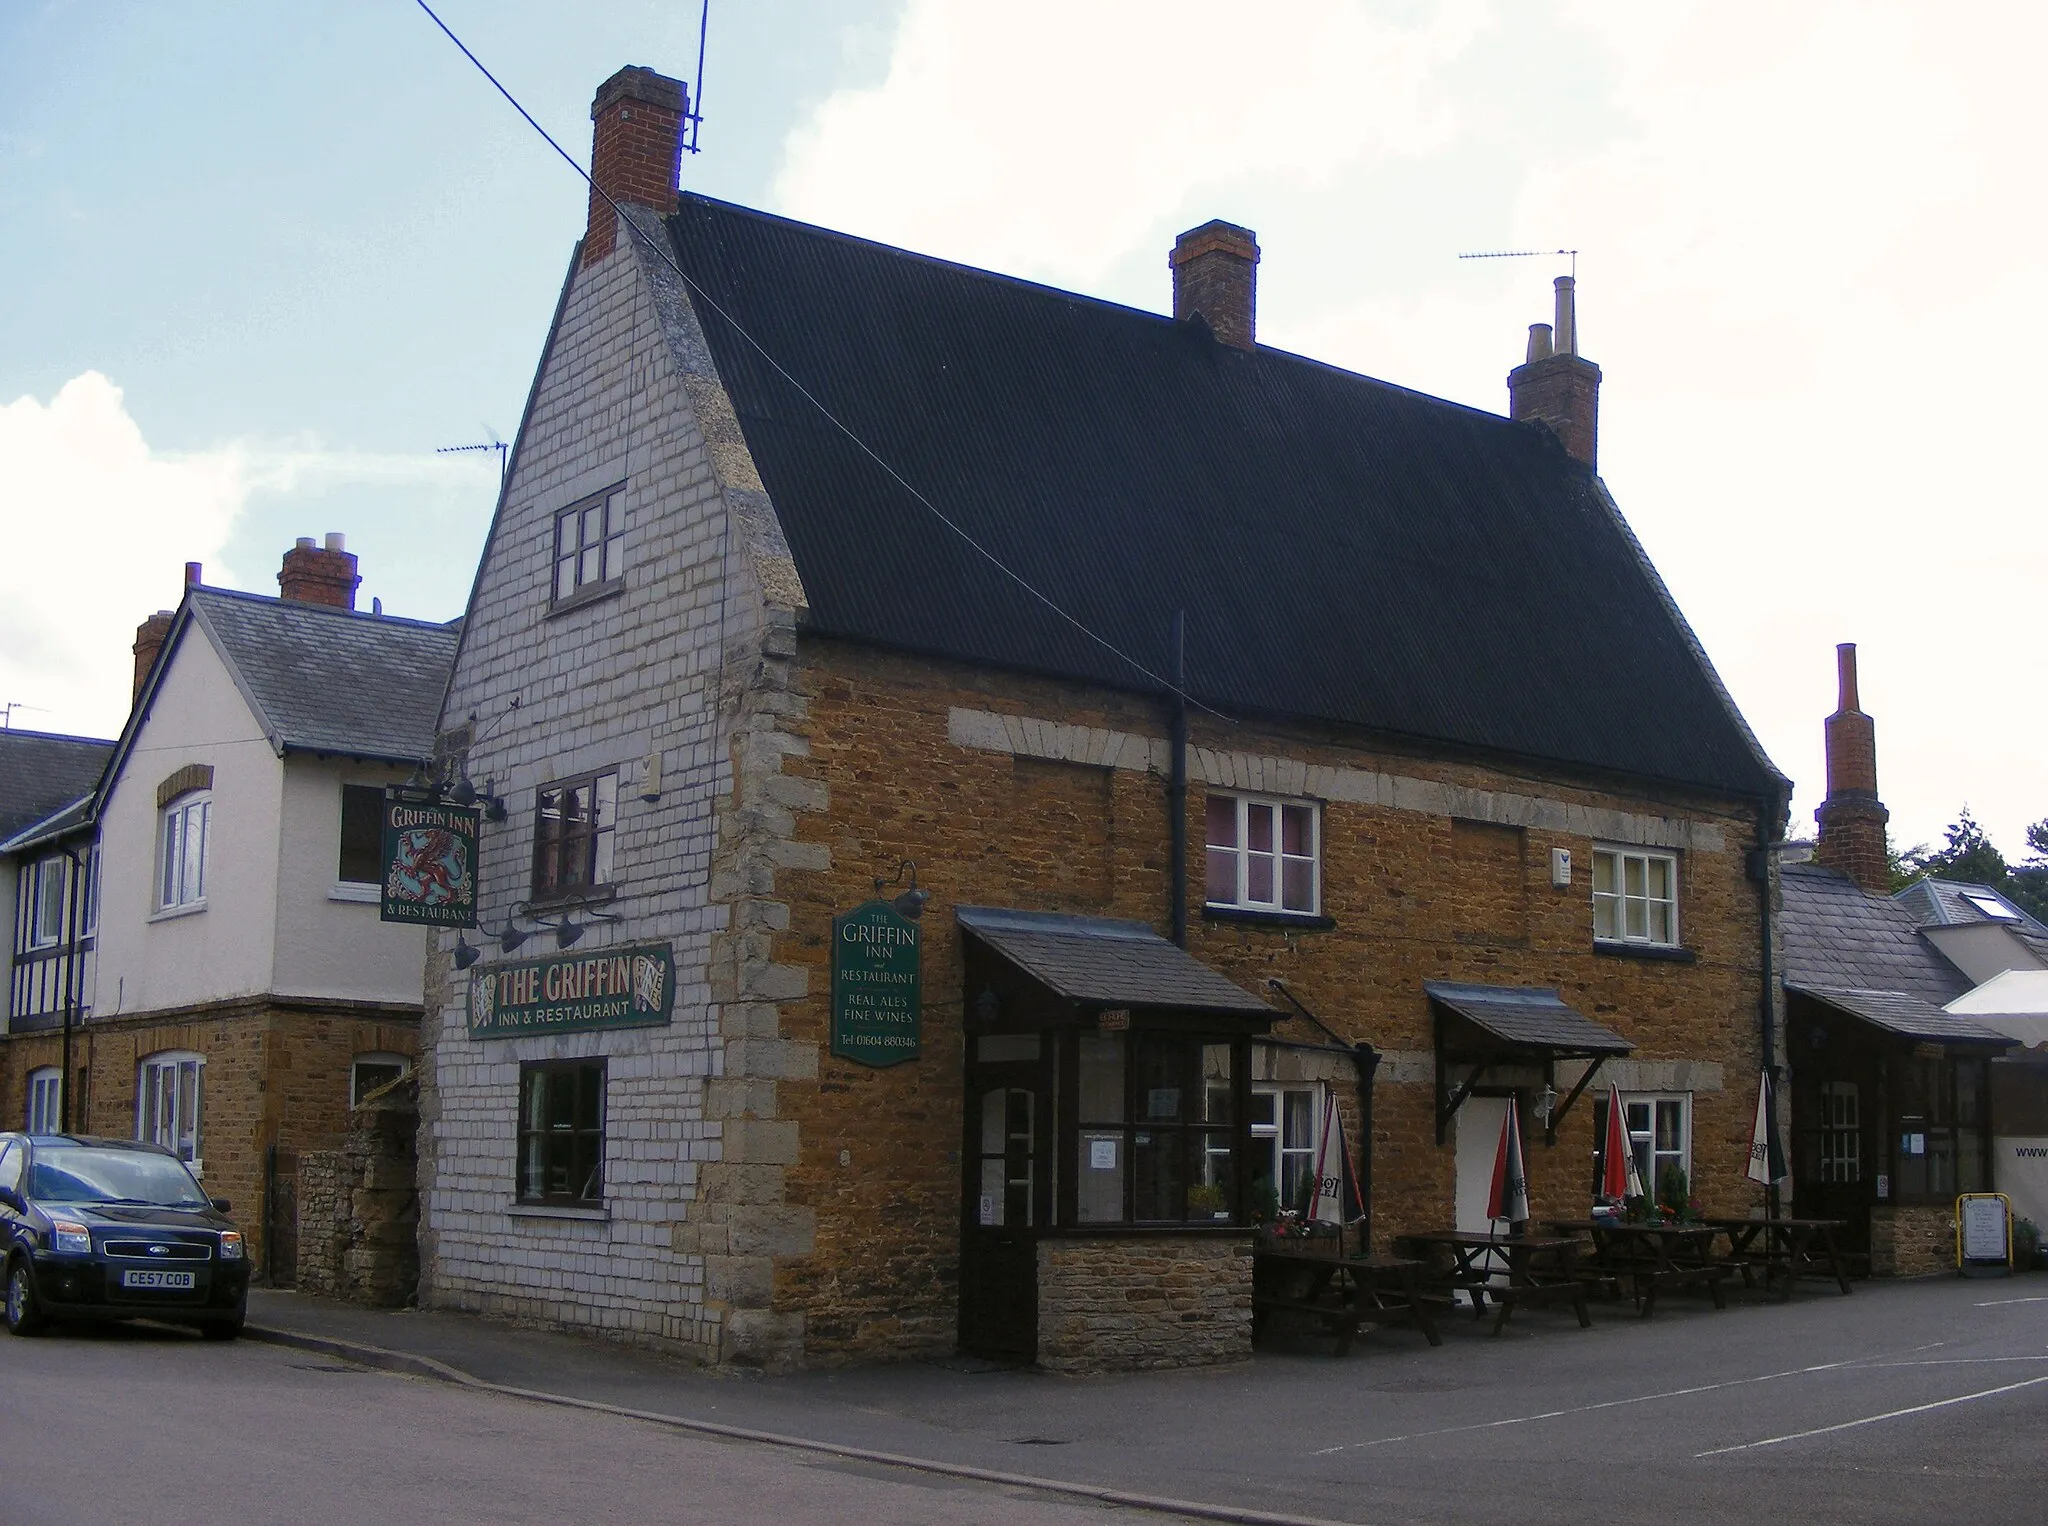 Photo showing: The Griffin Inn, a listed building in the village of Pitsford in Northamptonshire, UK.